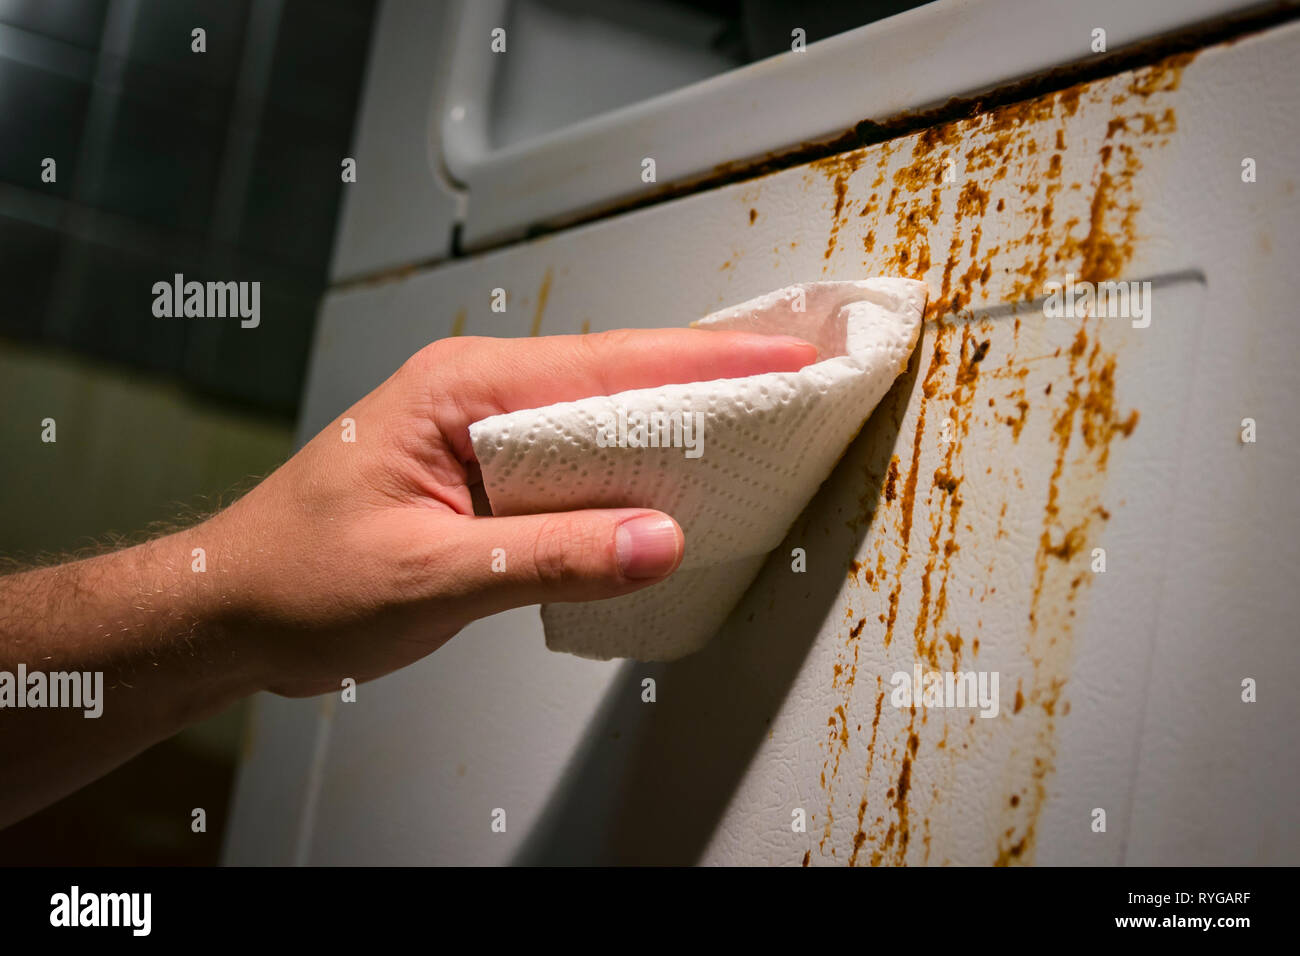 Hand cleaning baked on kitchen grime on side of oven appliance, using paper towel and cleaner. Stock Photo